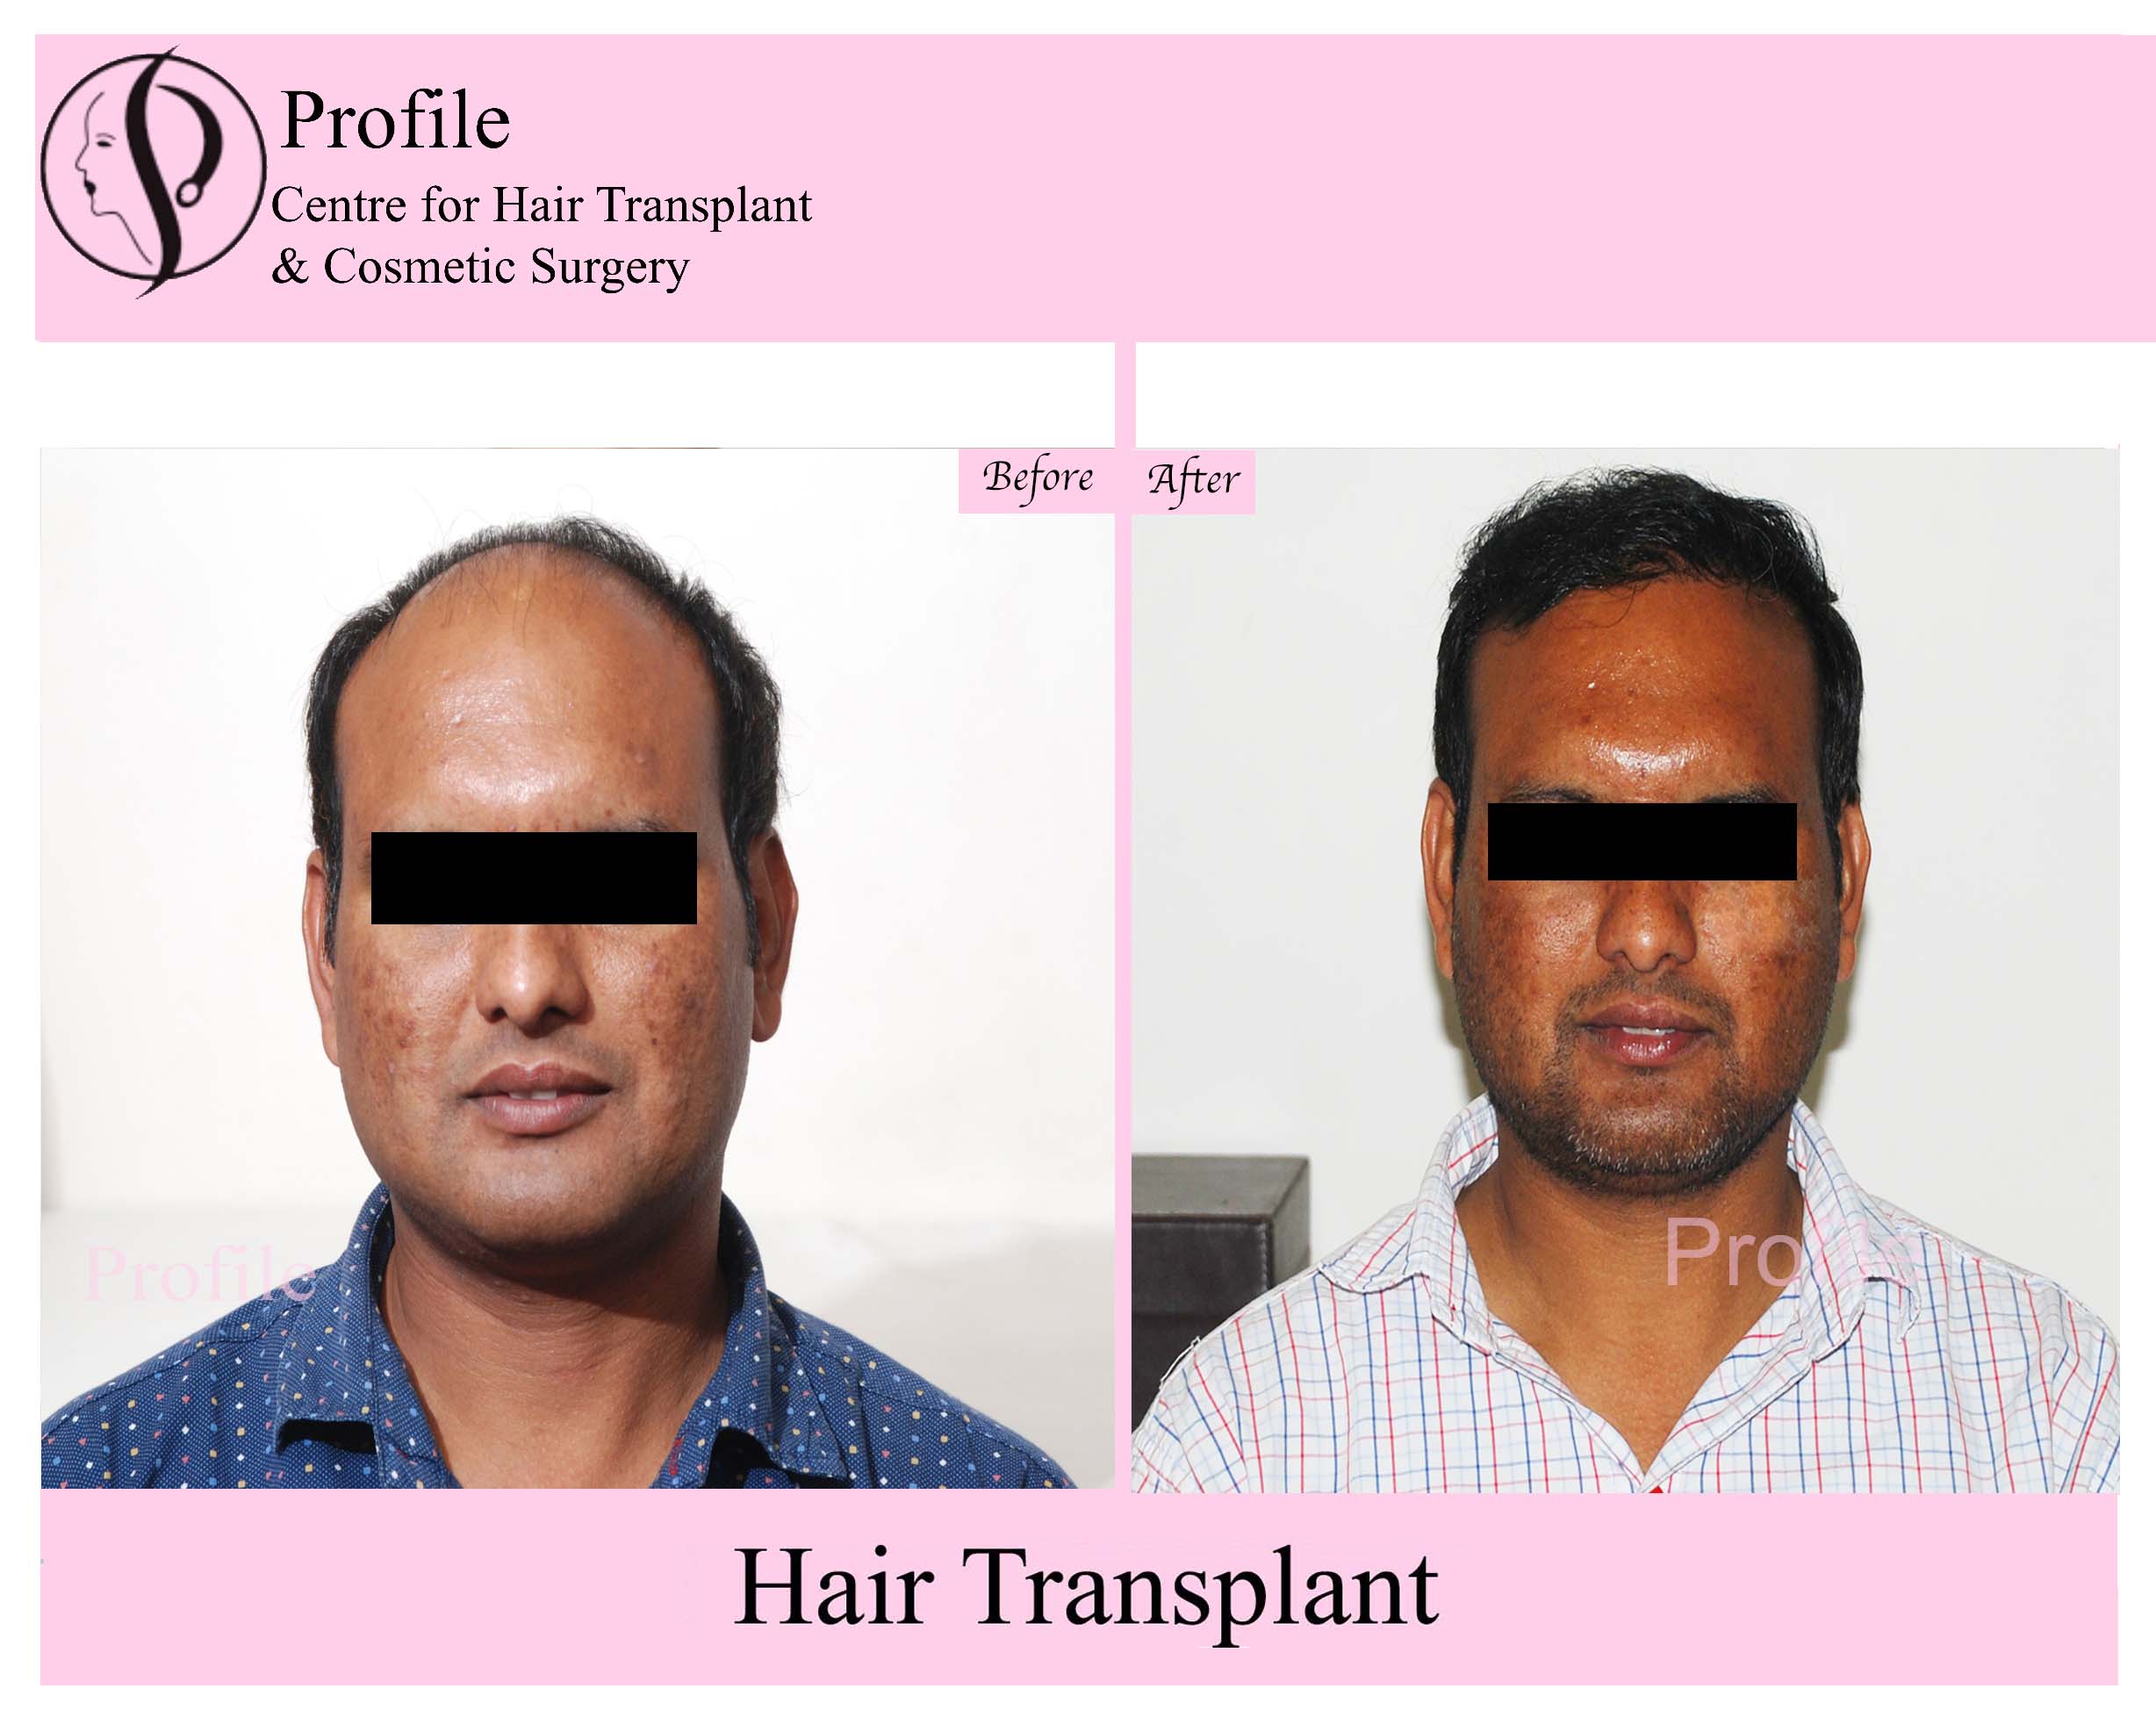 Hair Transplant Results before and after Surgery